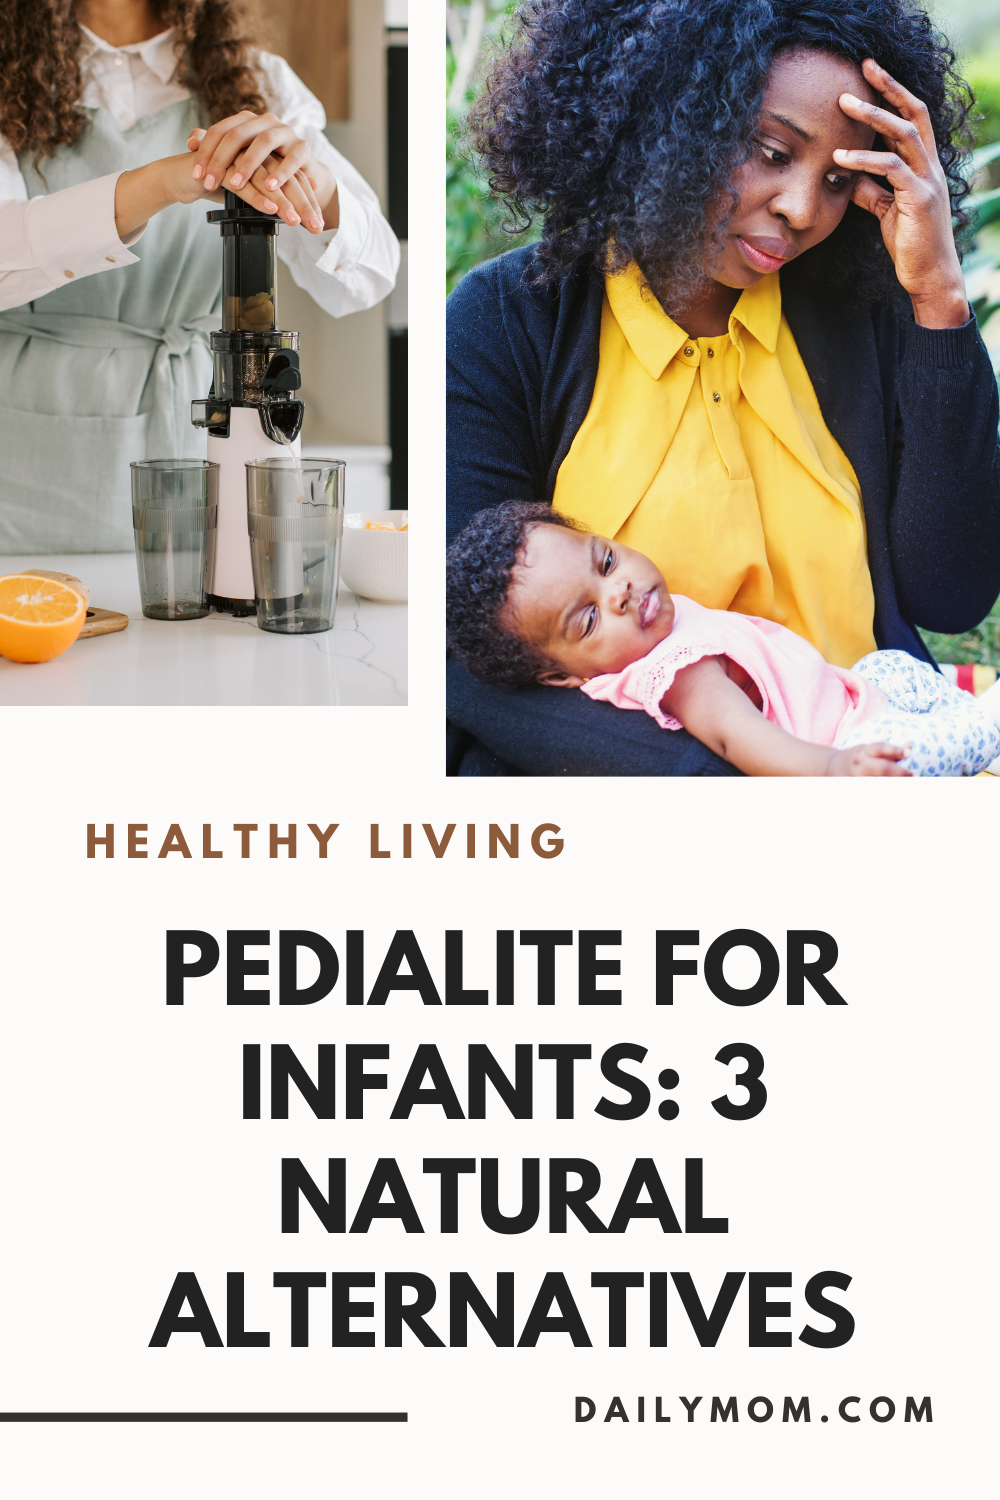 Daily Mom Parent Portal Pedialyte For Infants